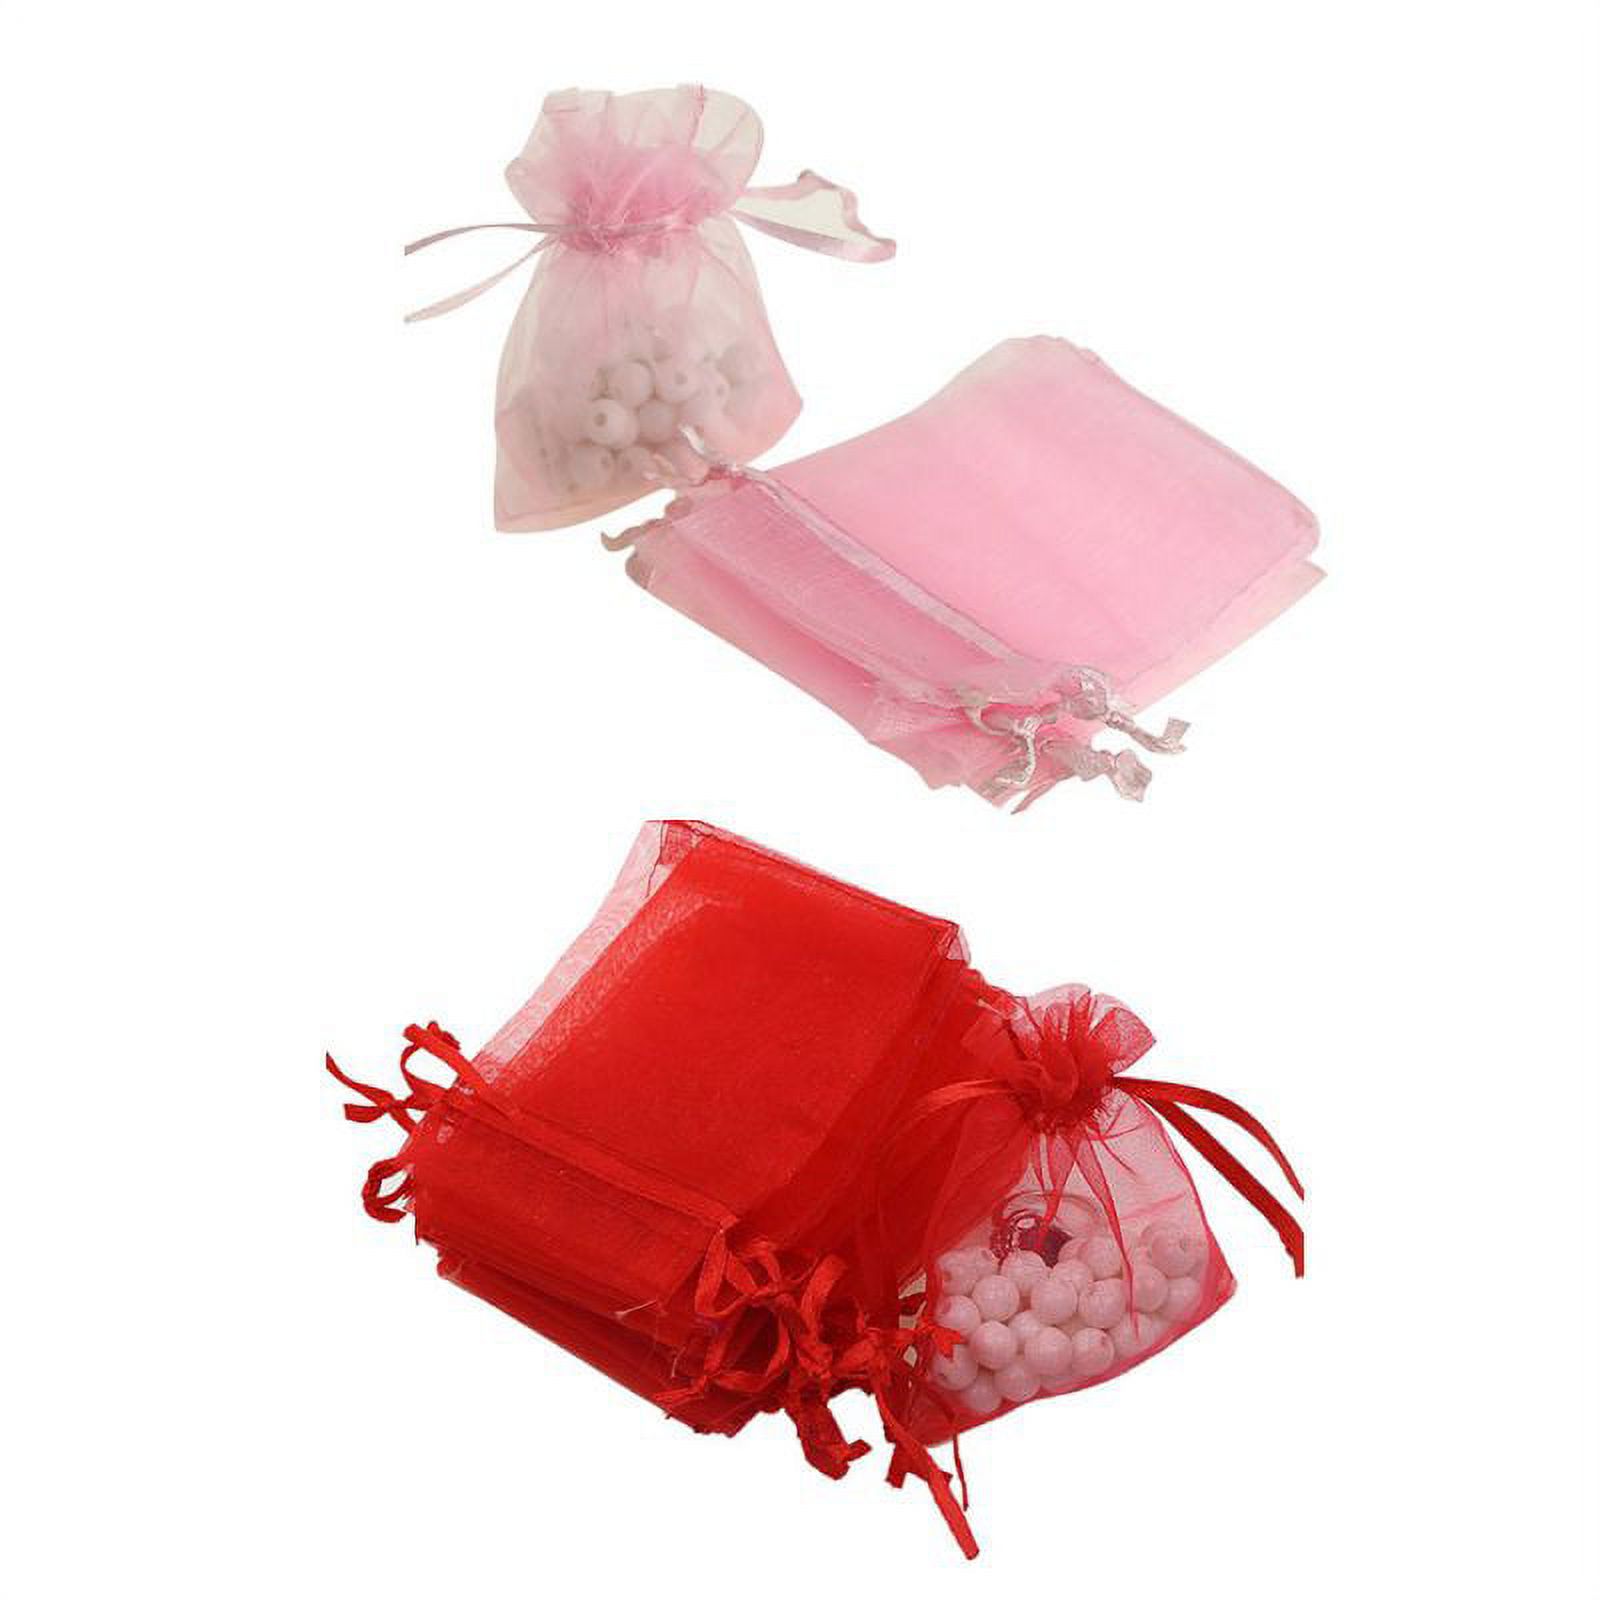 SUPERHOMUSE 100PCS Sheer Drawstring Organza Bags Jewelry Pouche Wedding Party Favor Gift Bag - image 3 of 8